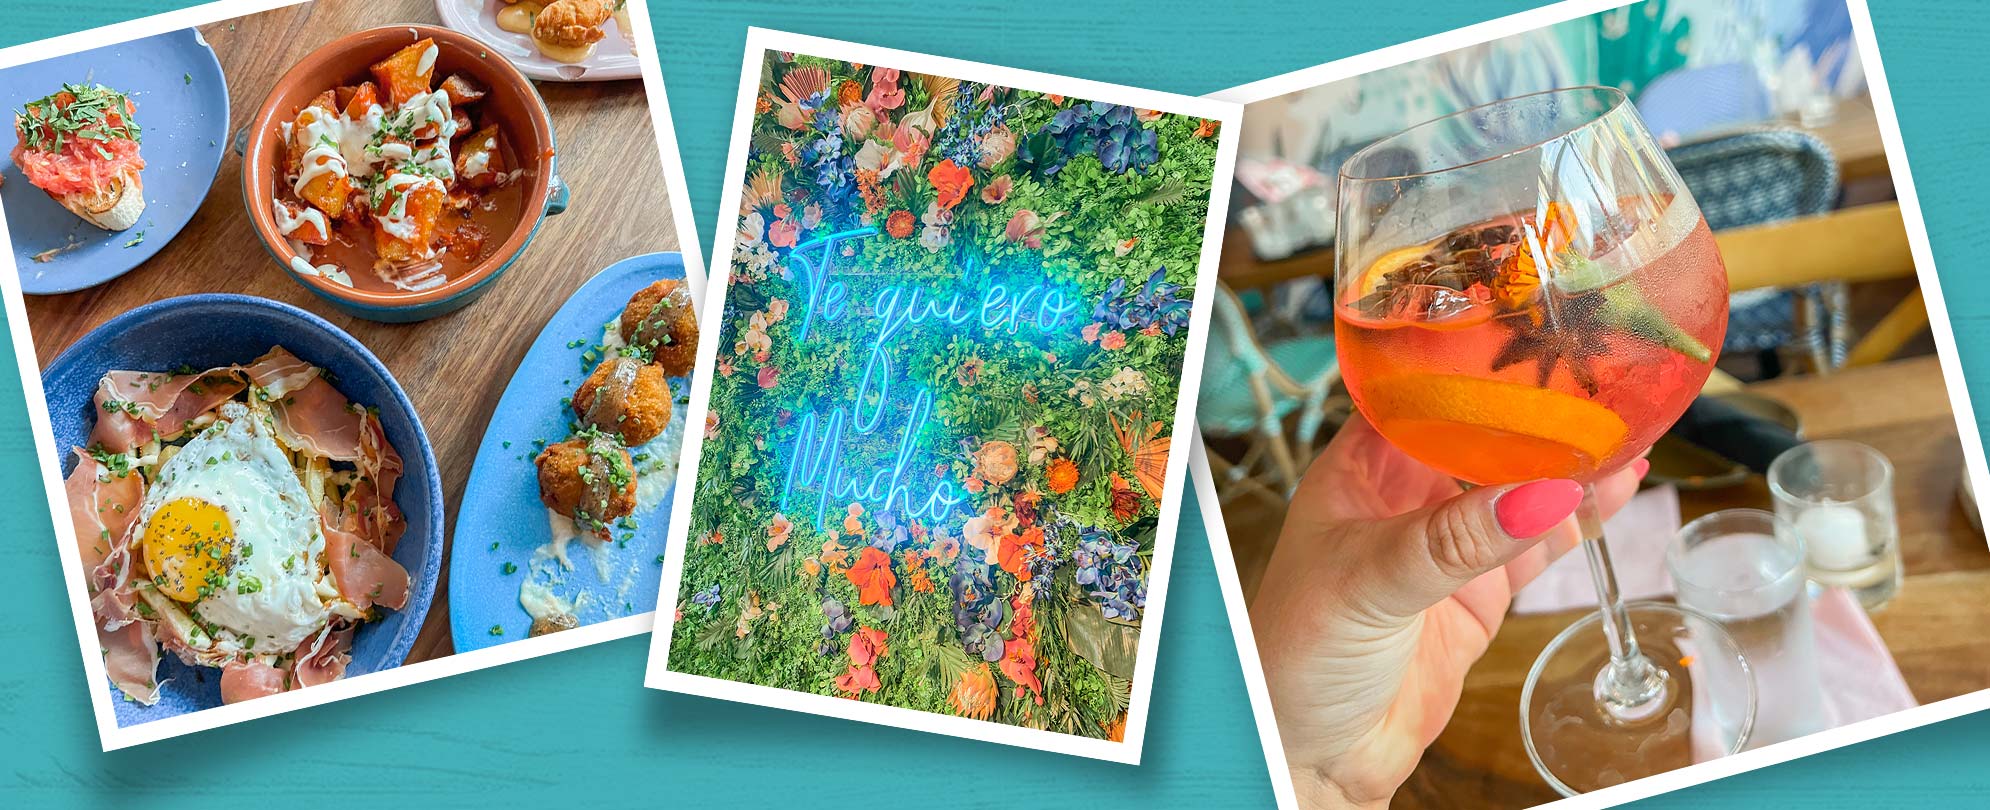 Three snapshots on a teal background showing aerial shot of tapas entrees on a table, a neon sign reading "Te quiero Mucho" on a grass and flower wall, and a woman's hand holding a glass of spicy margarita with fruit and flowers in it.